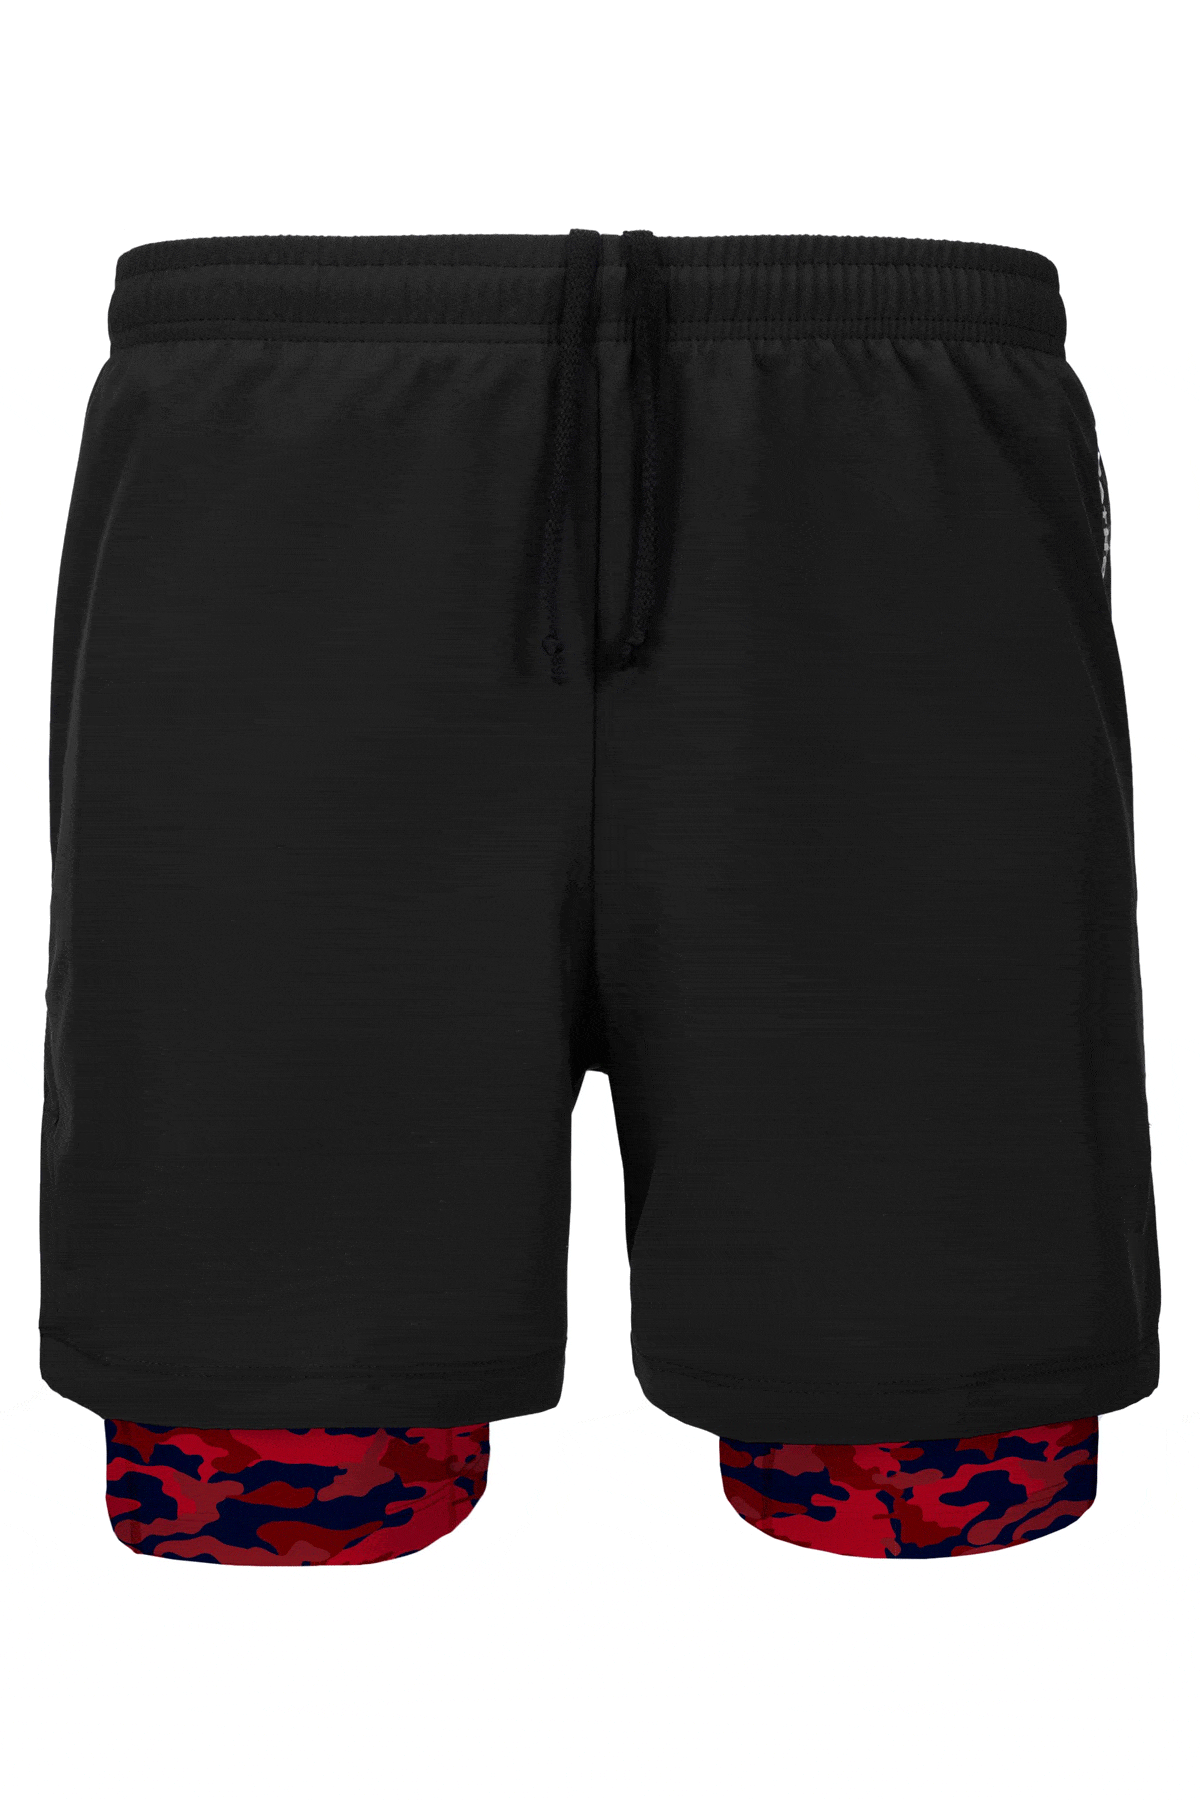 Men's Double Layer Denim Wash Training Shorts Red Camo / Small